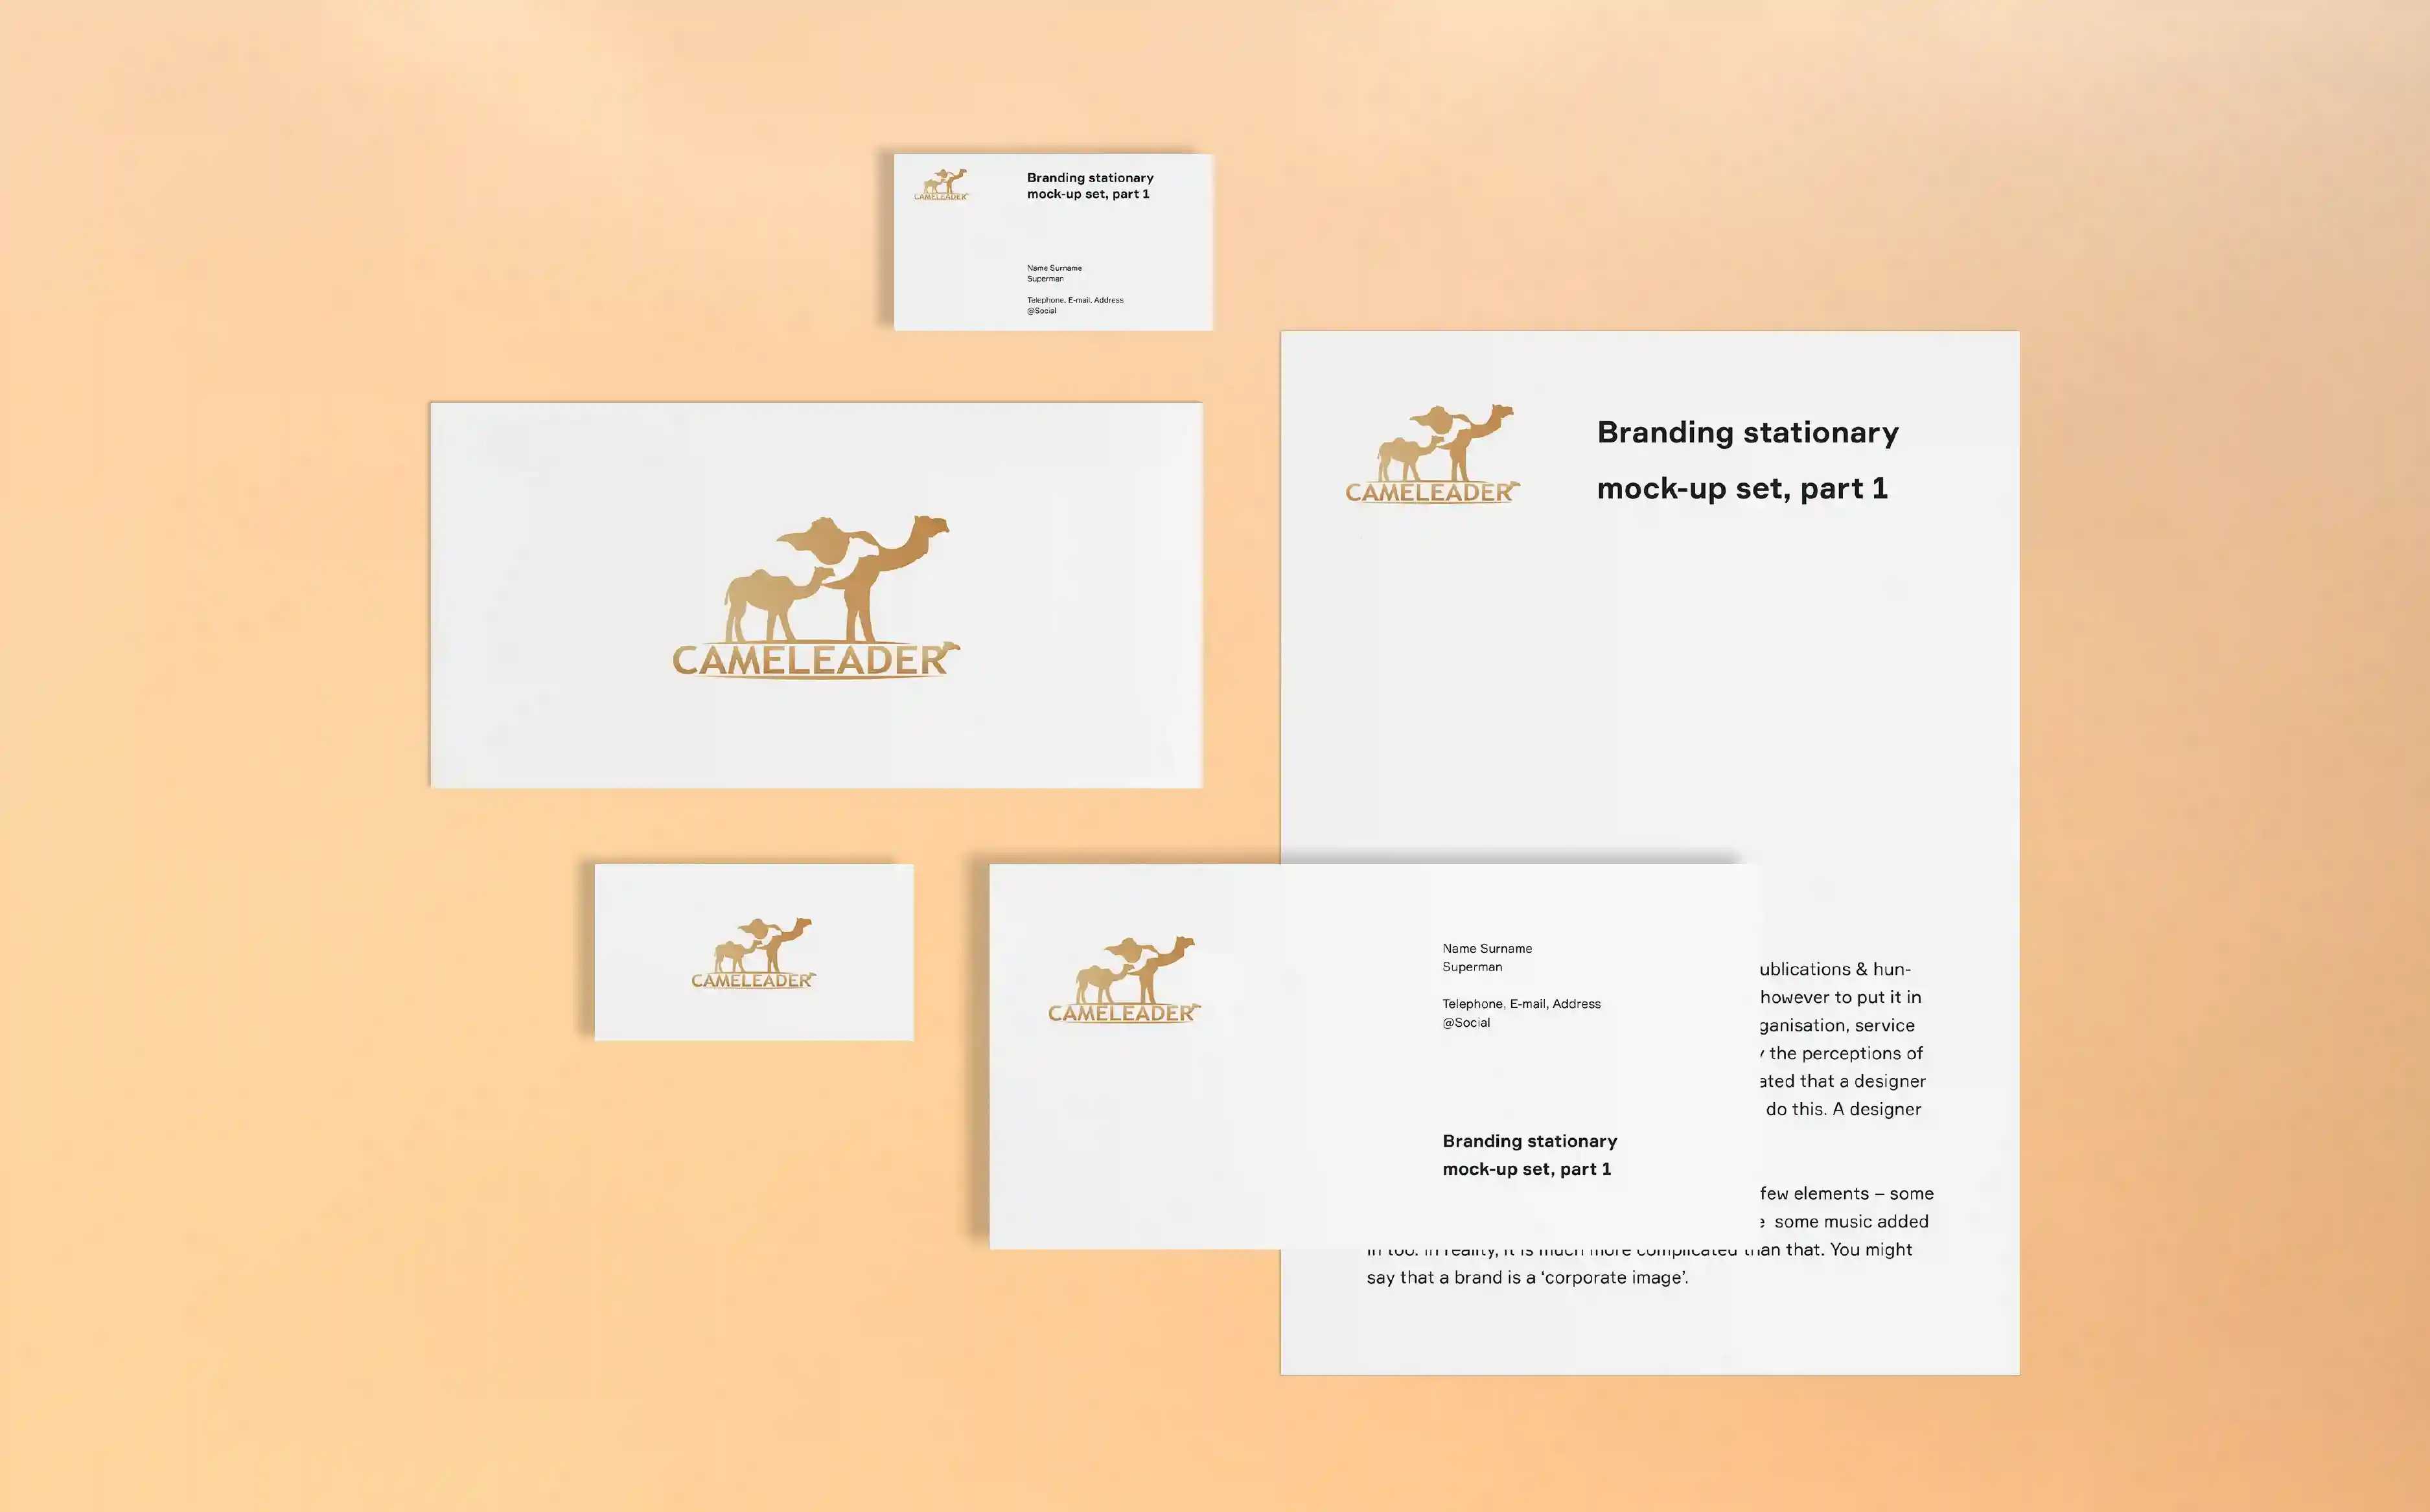 visual identity for the networking app designed exclusively for camel enthusiasts and professionals worldwide.